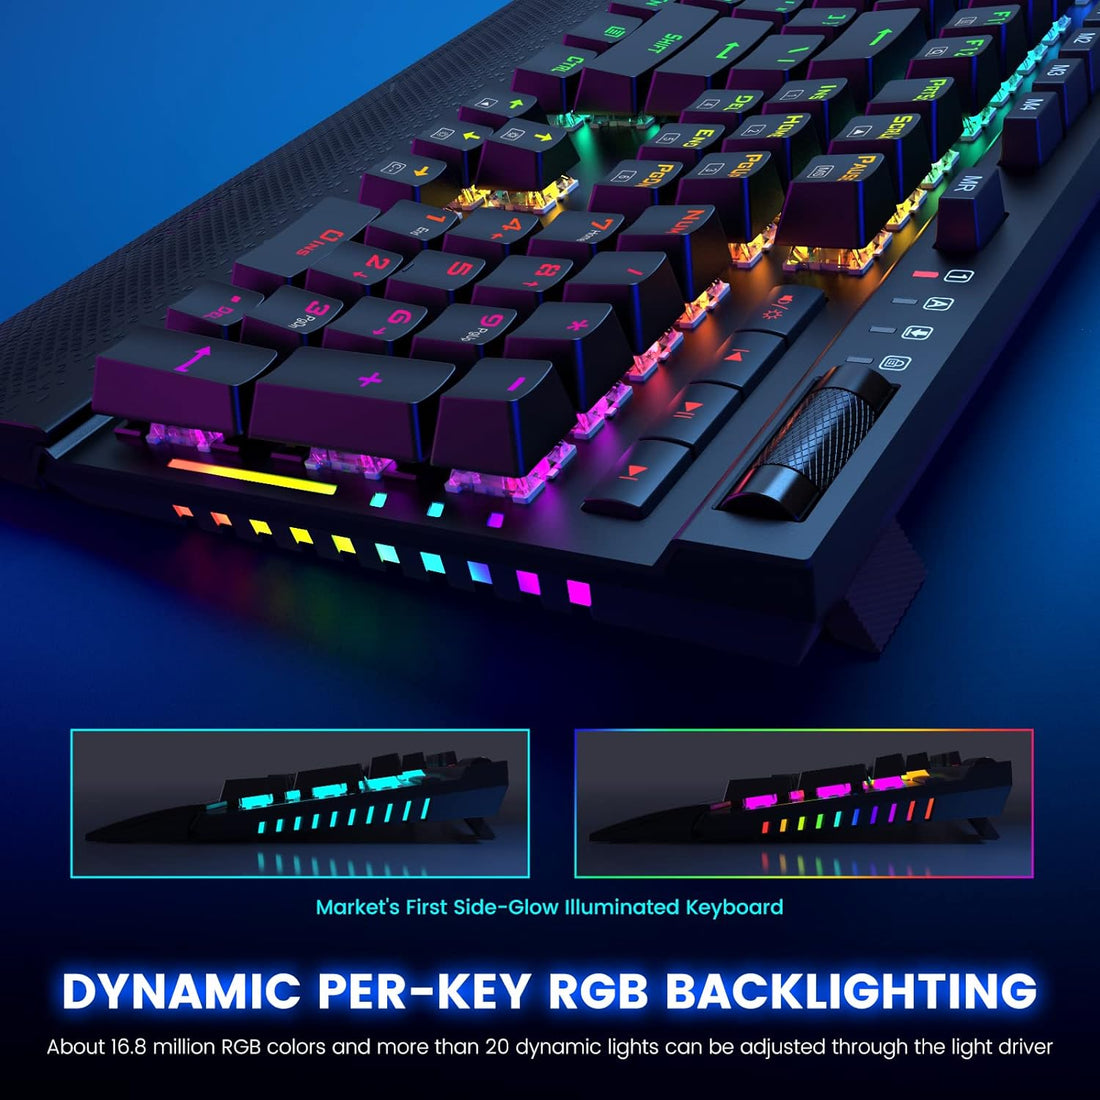 RisoPhy Wired Mechanical Gaming Keyboard - Hot-Swappable Red Switches - Linear & Silent - Chroma RGB Lighting - Programmable Macros - Aluminum Alloy Frame - Magnetic Wrist Rest - Media Control Knob